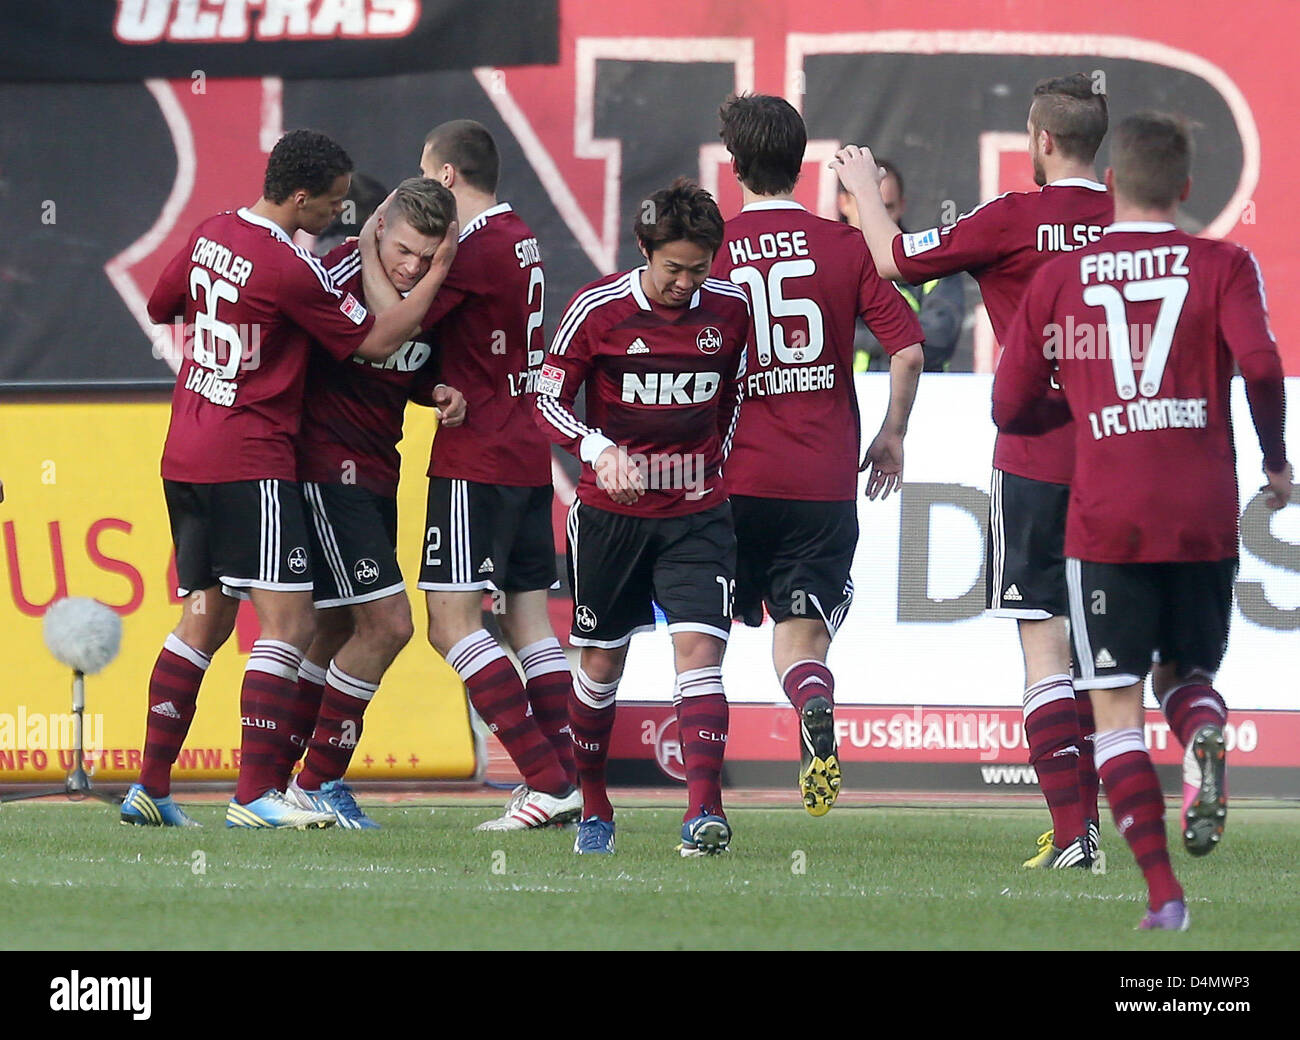 Nuremberg's Alexander Esswein (2-L) celebrates his 2-0 goal with his team mates Timothy Chandler (L-R), Timmy Simons, Hiroshi Kiyotake, Timm Klose, Per Nielsson and Mike Frantz  during the German Bundesliga soccer match between 1. FC Nuremberg and FC Schalke 04 at Grundig Stadium in Nuremberg, Germany, 16 March 2013. Photo: DANIEL KARMANN  (ATTENTION: EMBARGO CONDITIONS! The DFL permits the further utilisation of up to 15 pictures only (no sequential pictures or video-similar series of pictures allowed) via the internet and online media during the match (including halftime), taken from inside  Stock Photo